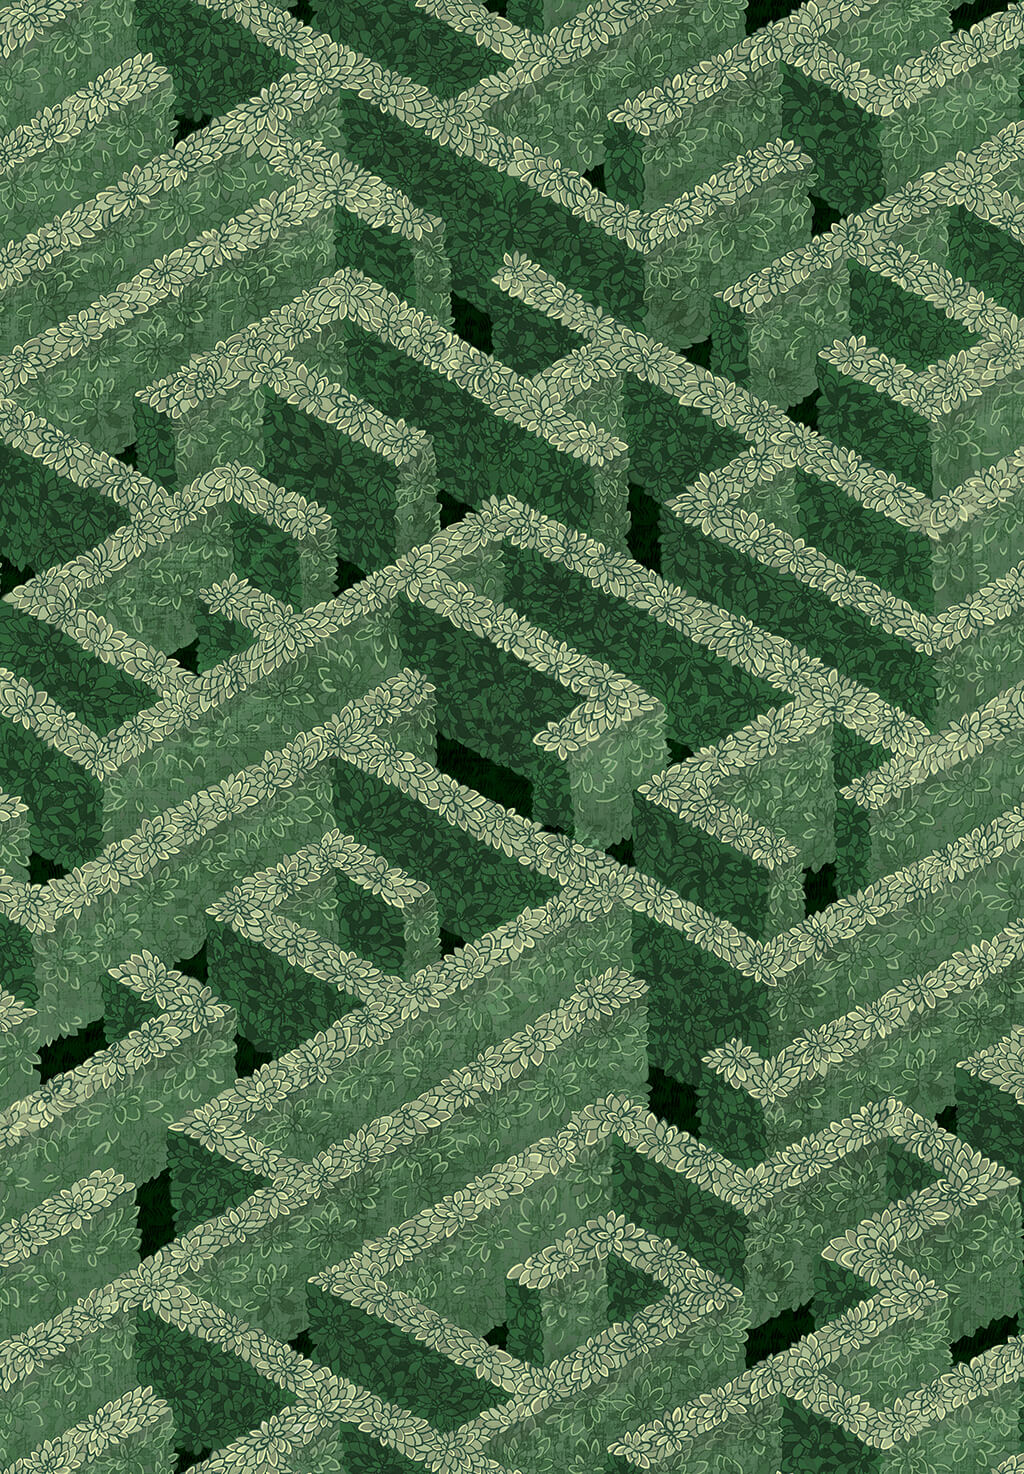 images/productimages/small/jmw-100711-labyrinth-green.jpg